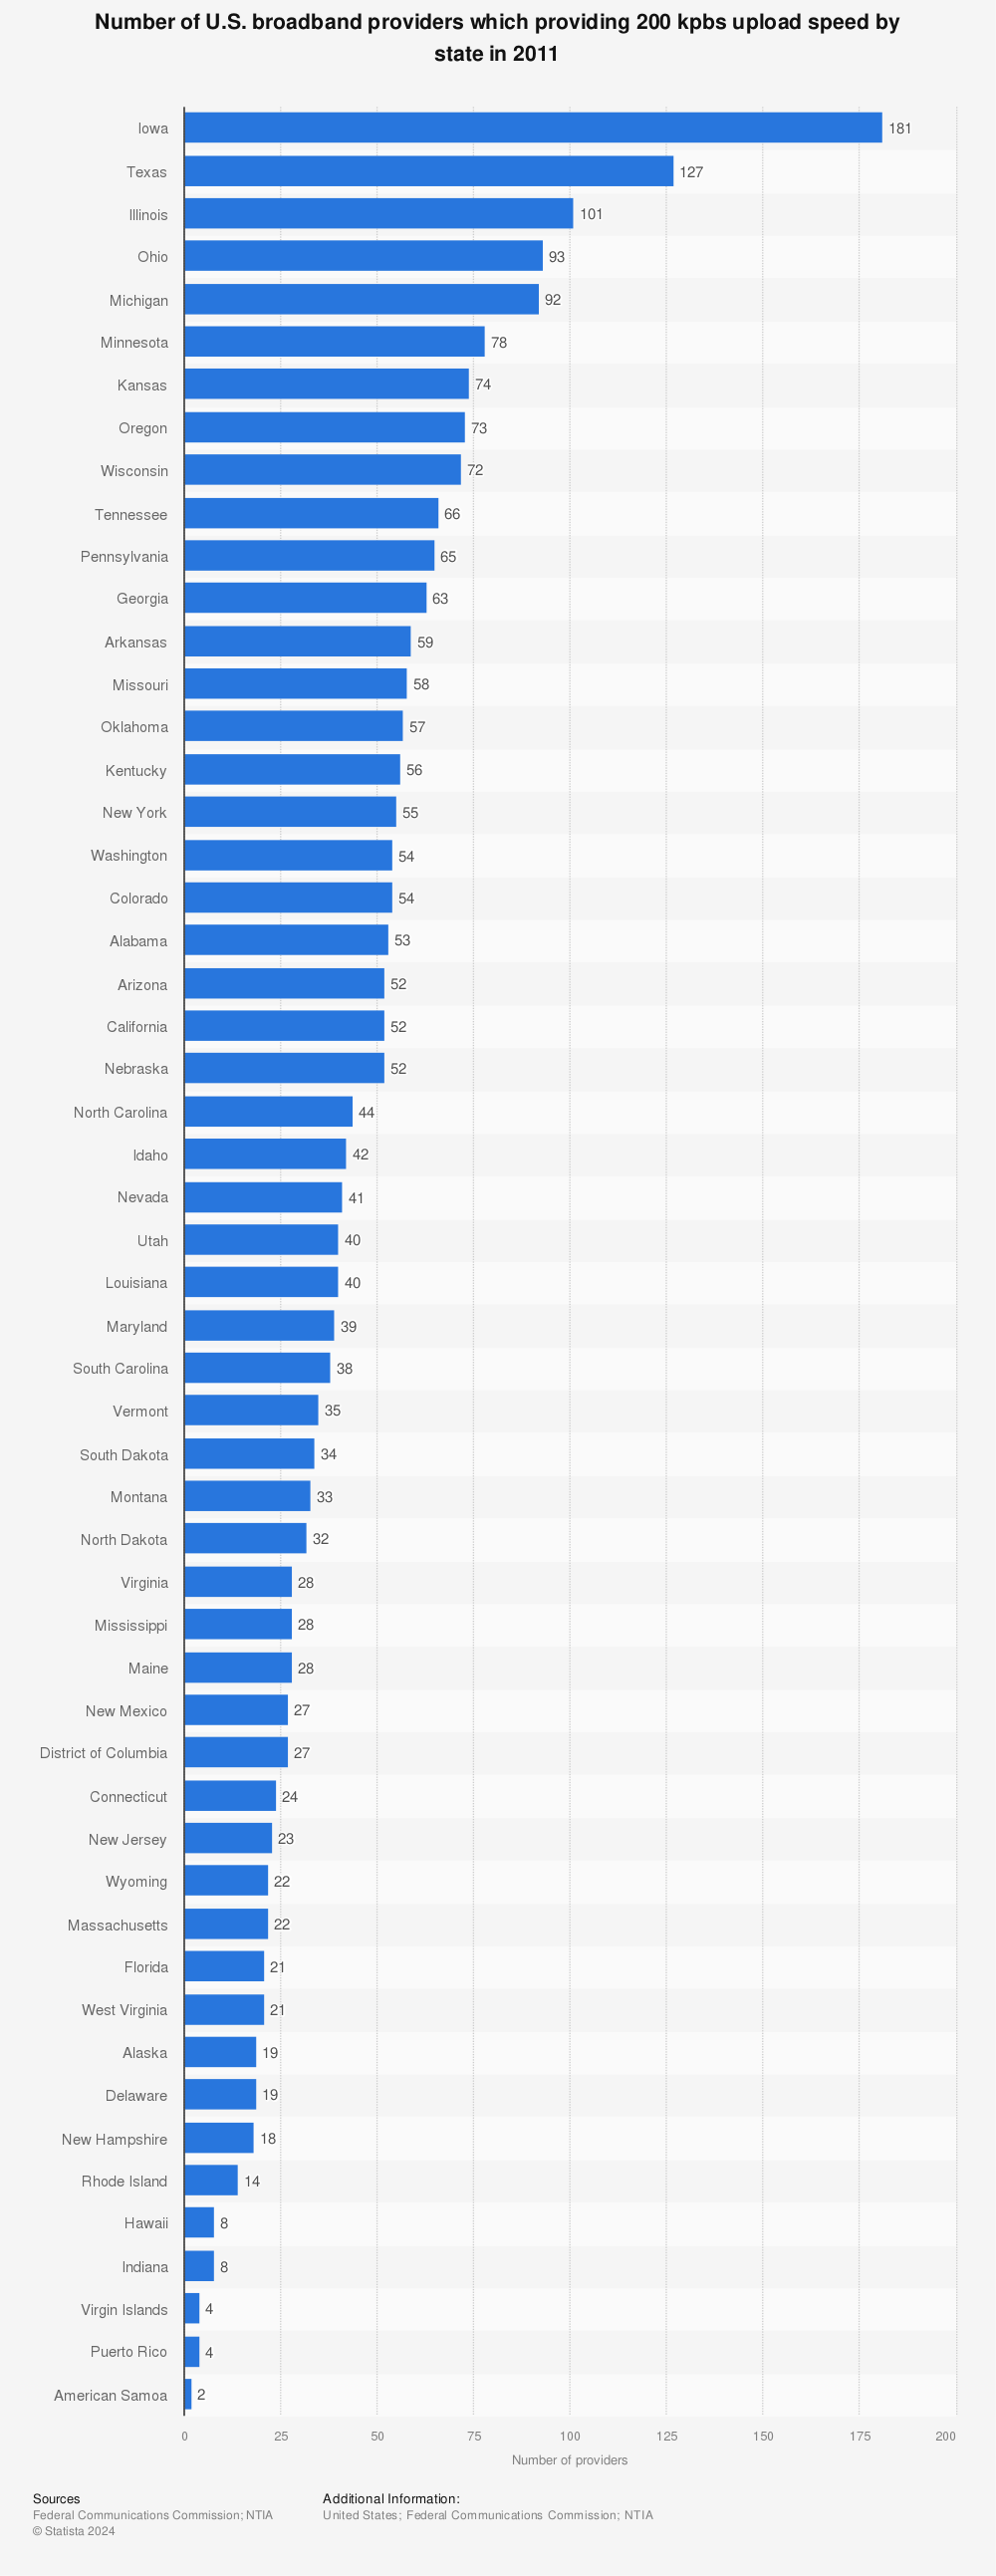 Statistic: Number of U.S. broadband providers which providing 200 kpbs upload speed by state in 2011 | Statista